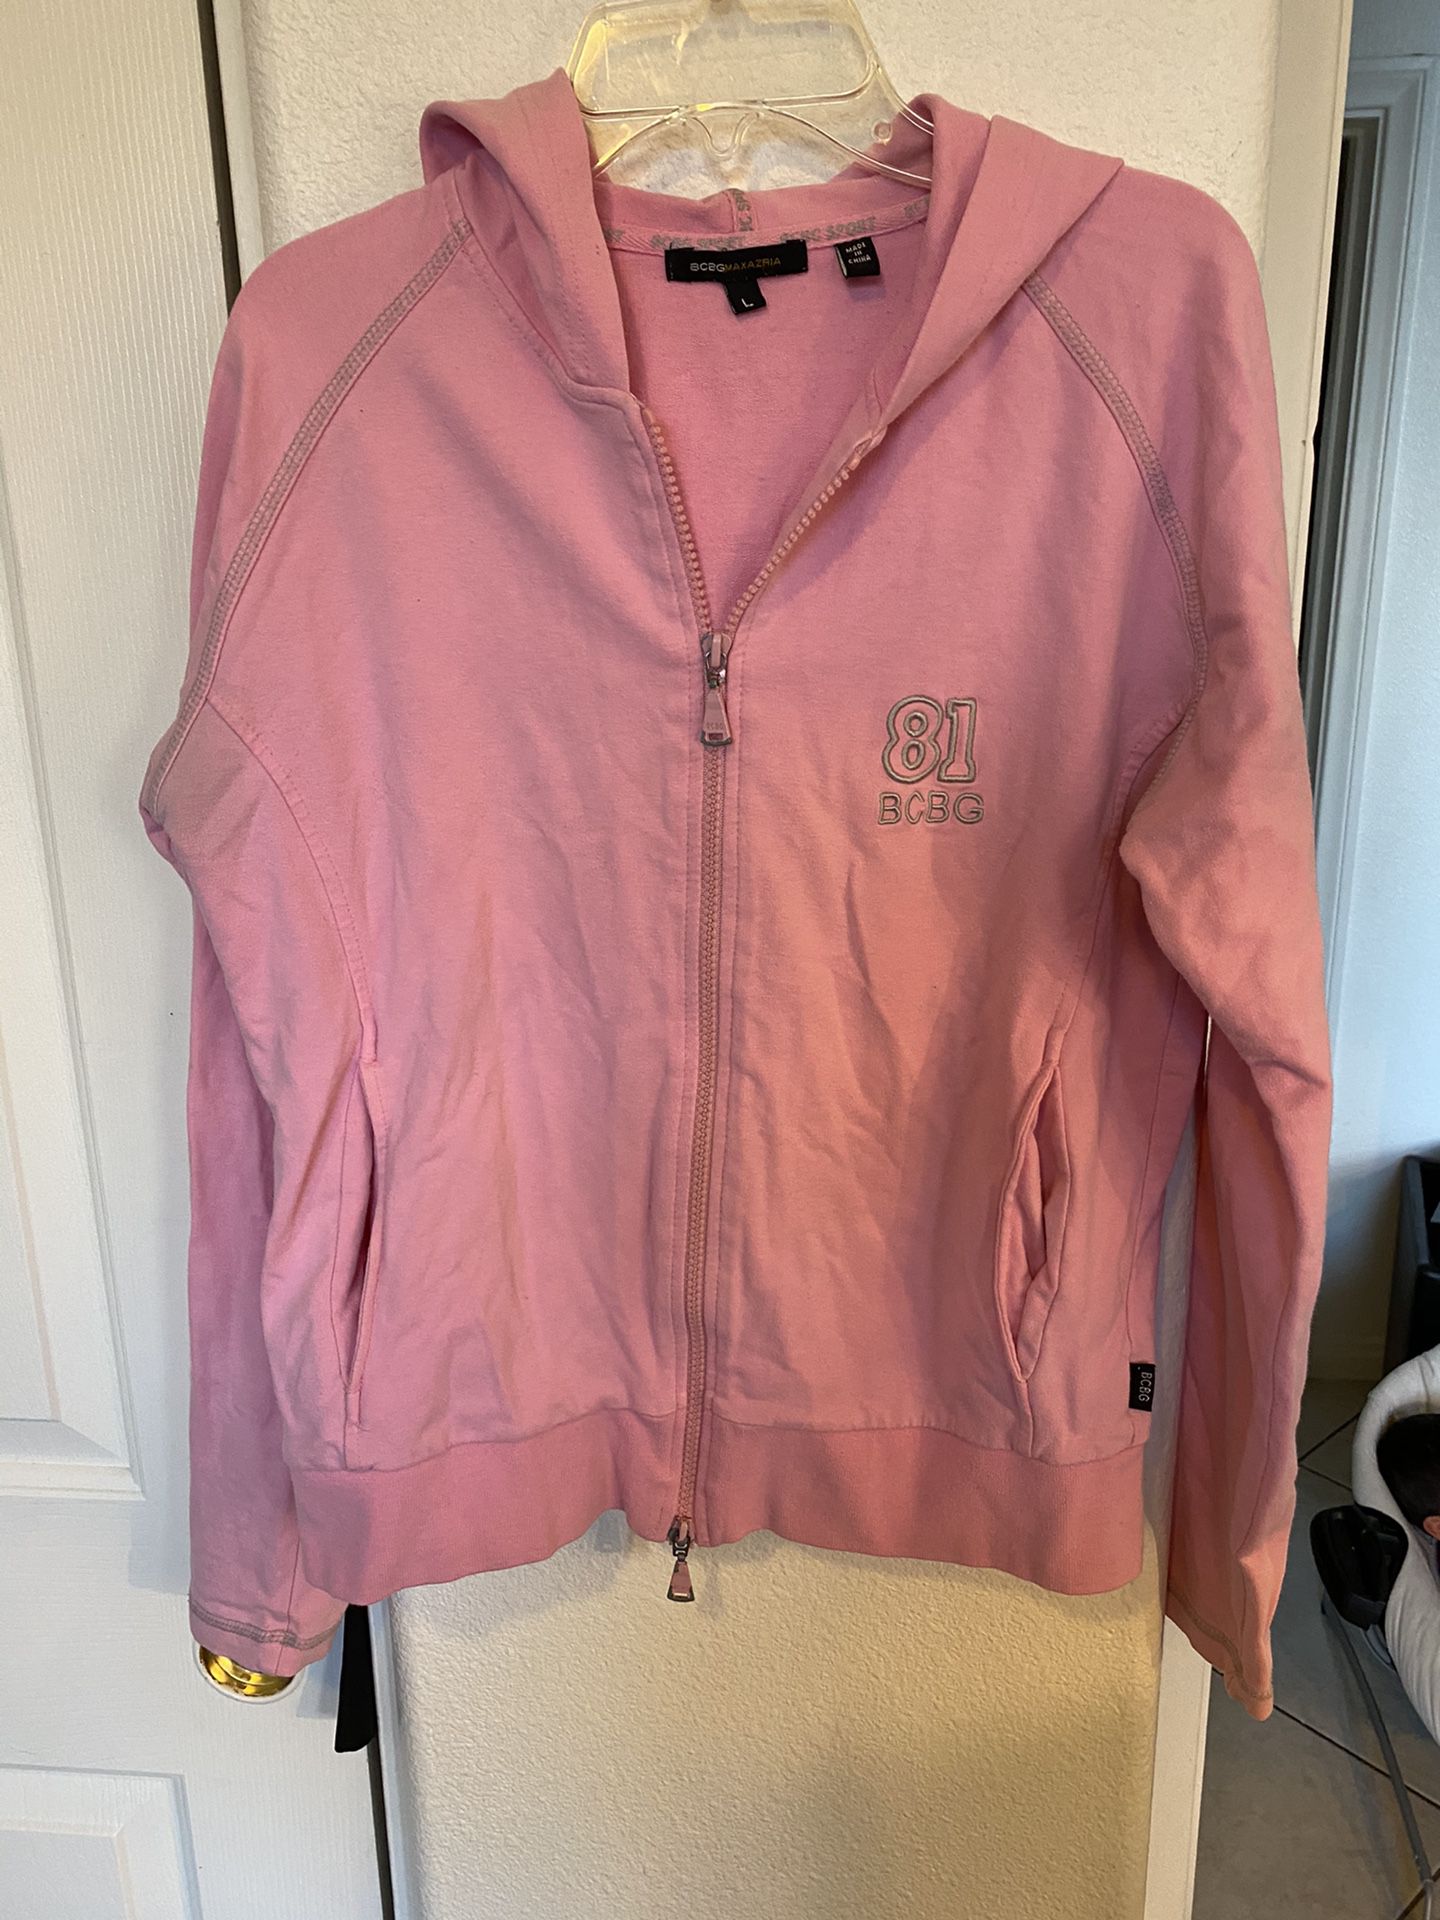 Woman’s Size Large Bcbg Pink Hoodie Zip Up